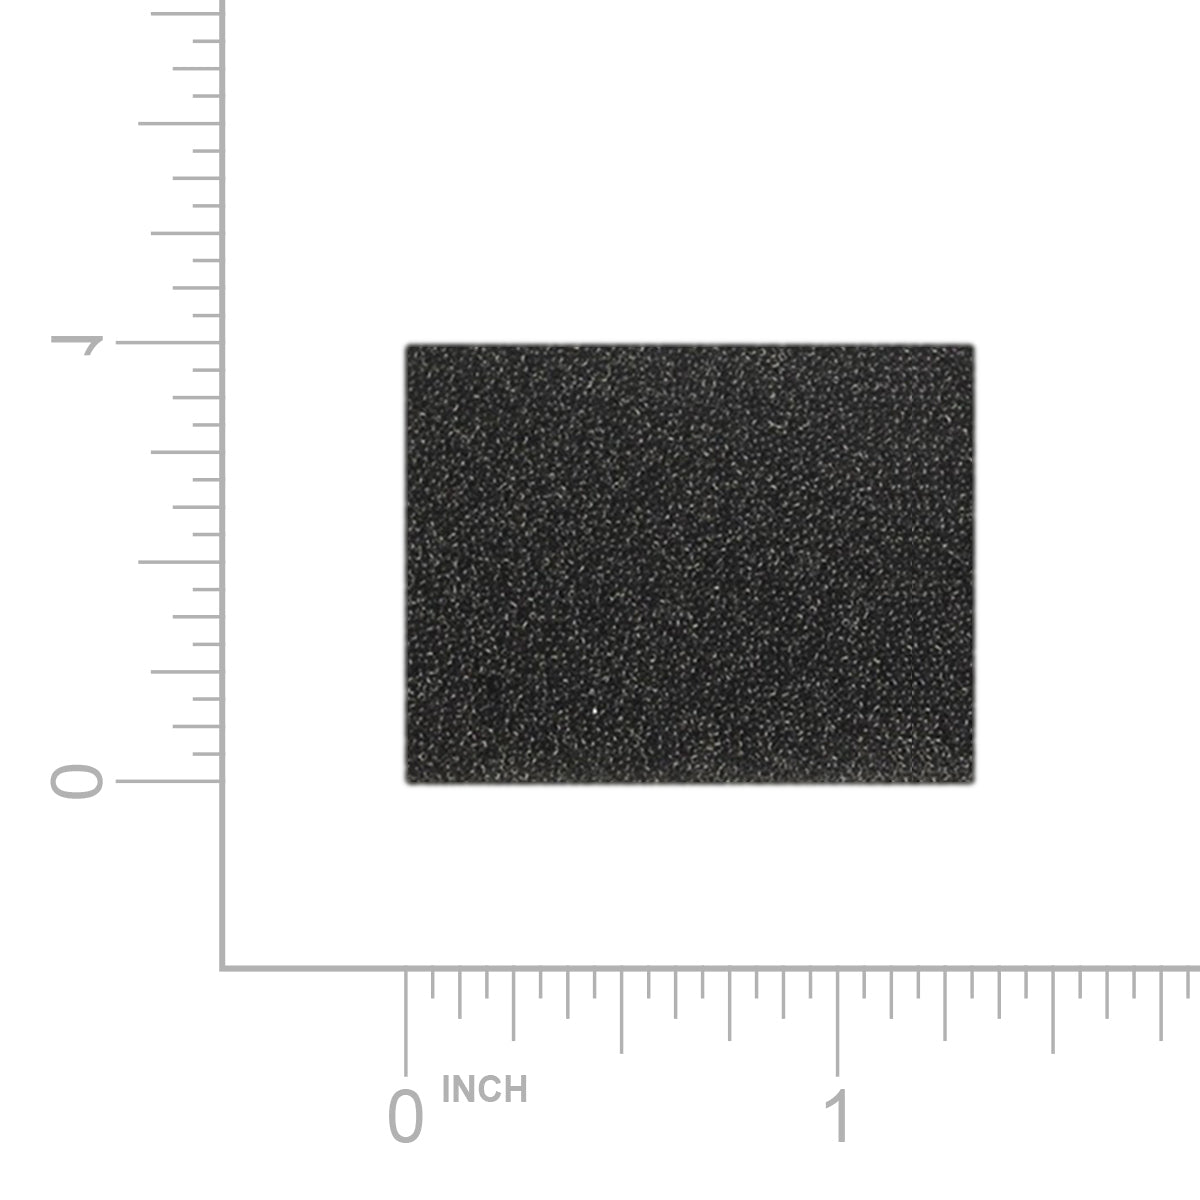 This Black Foam Pollen Filter from 3B React is designed for use with all Luna G3 Series CPAP and BiPAP machines. Foam pollen filters are reusable.